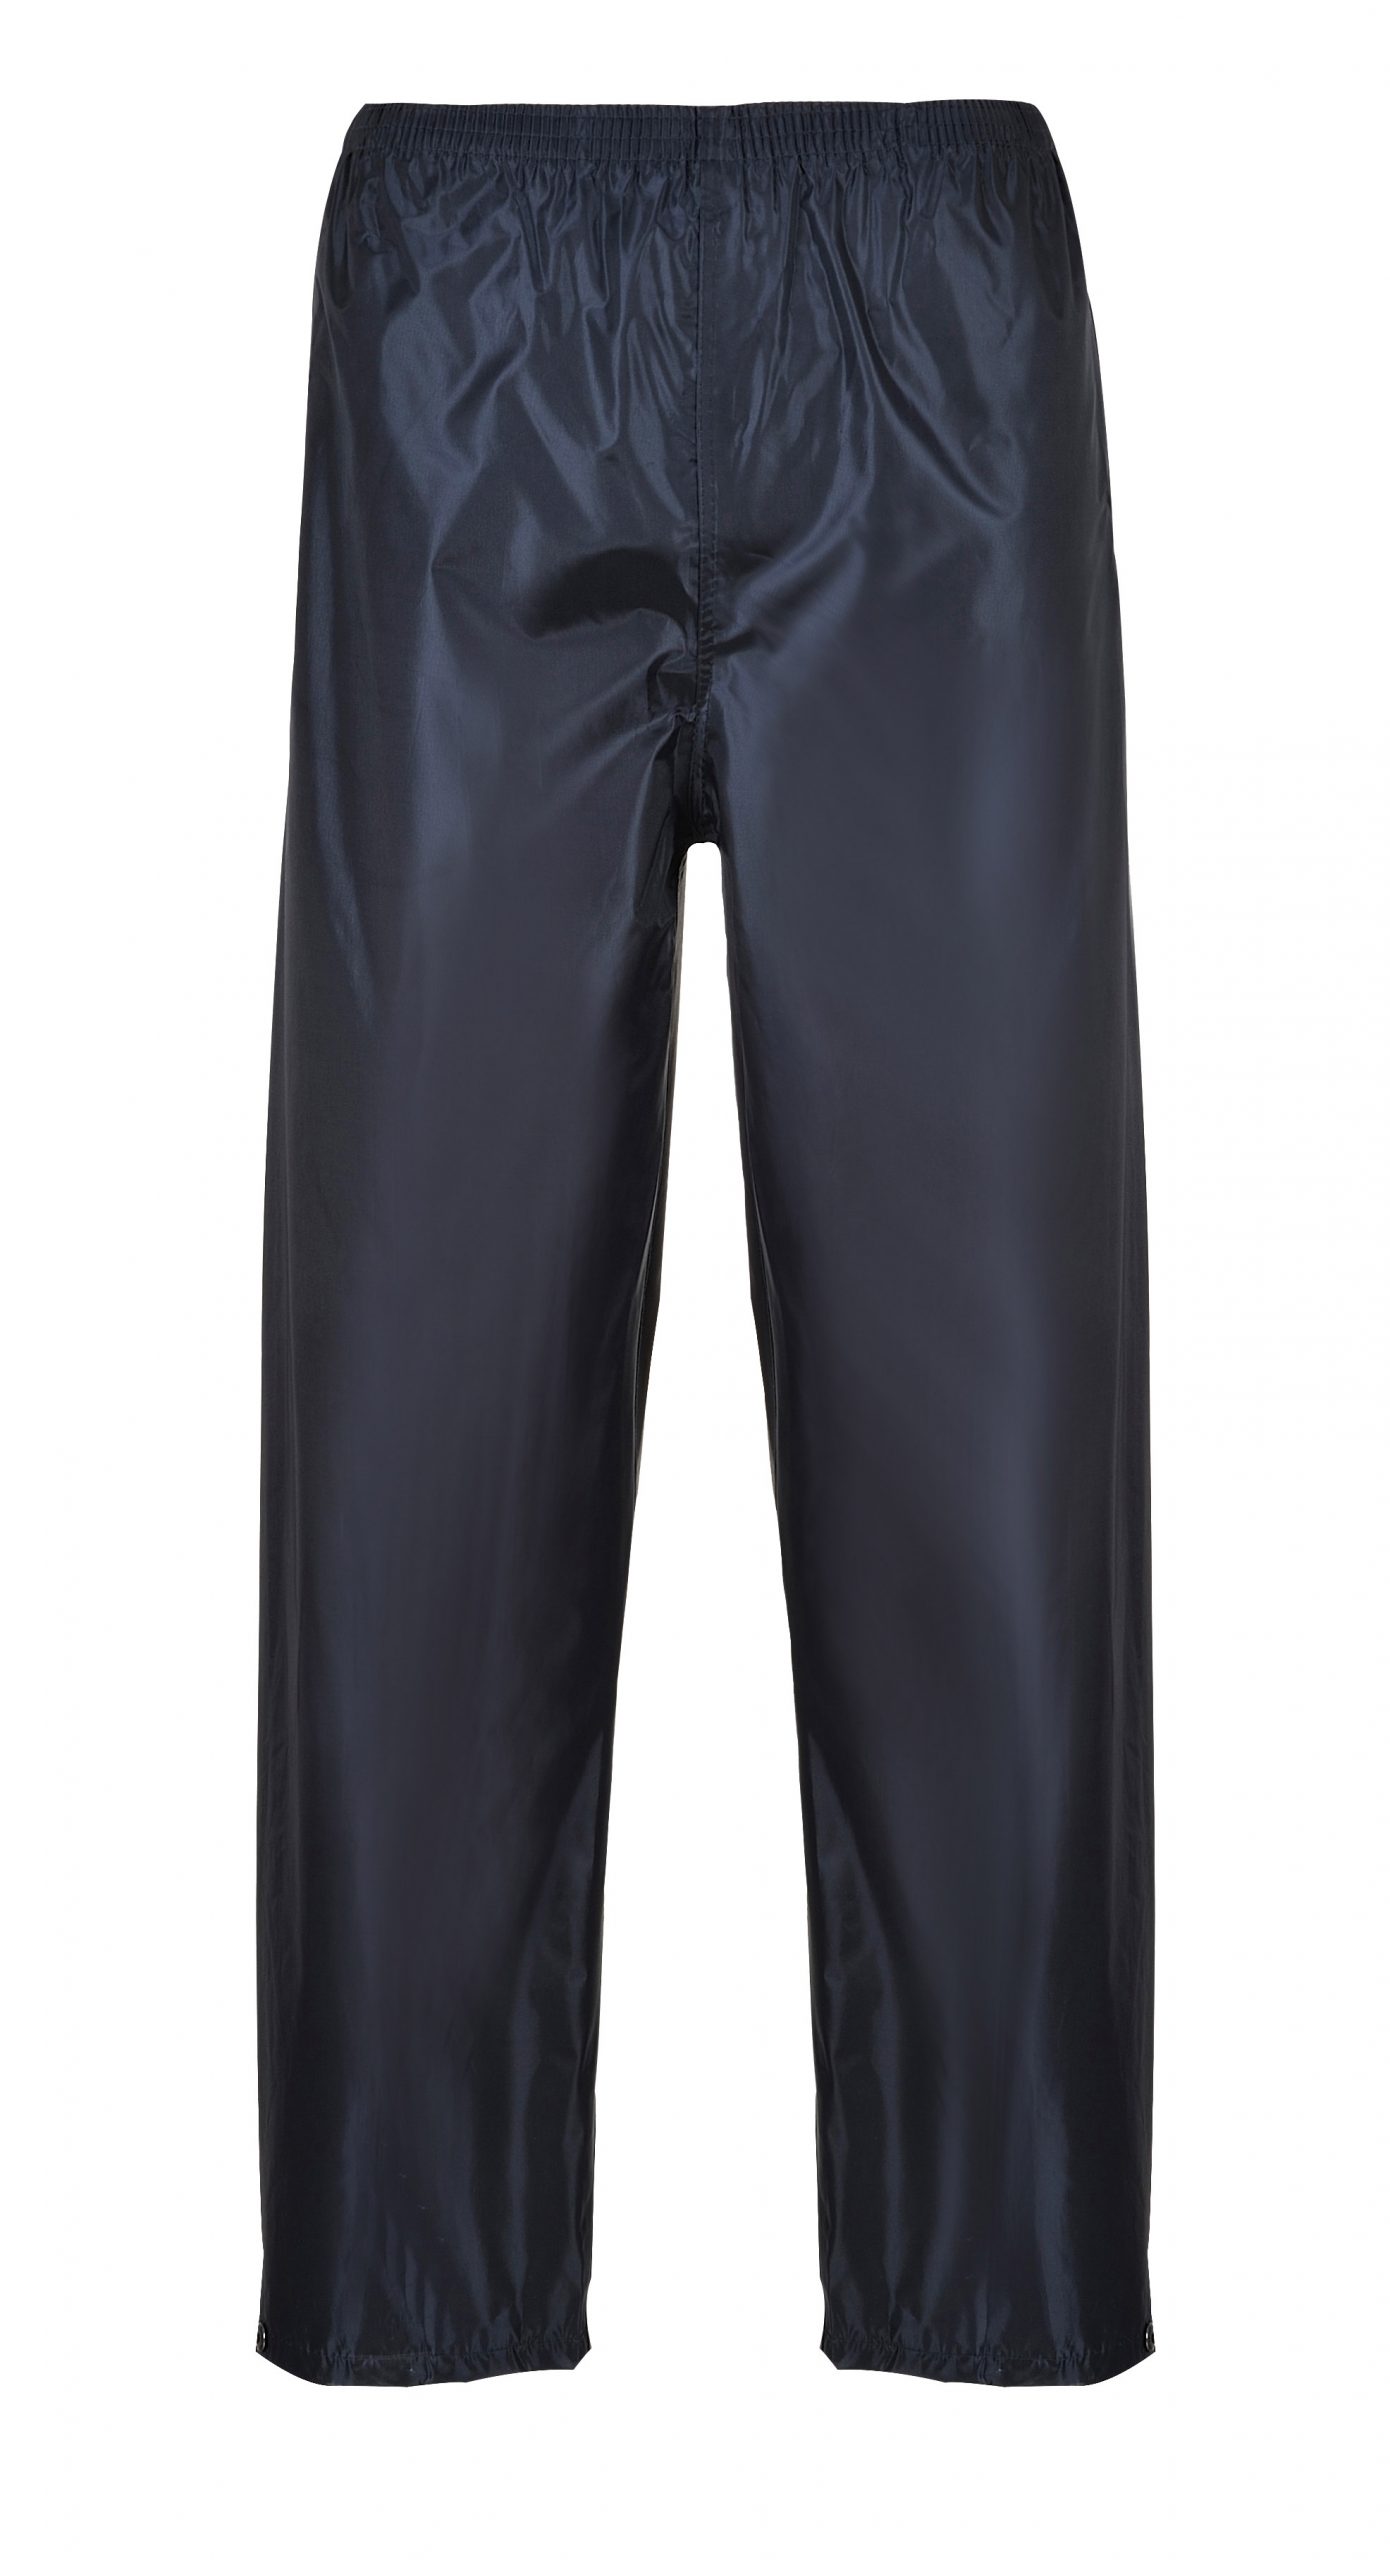 PortWest Adult Classic Adult Rain Trousers Various Color and Size S441 